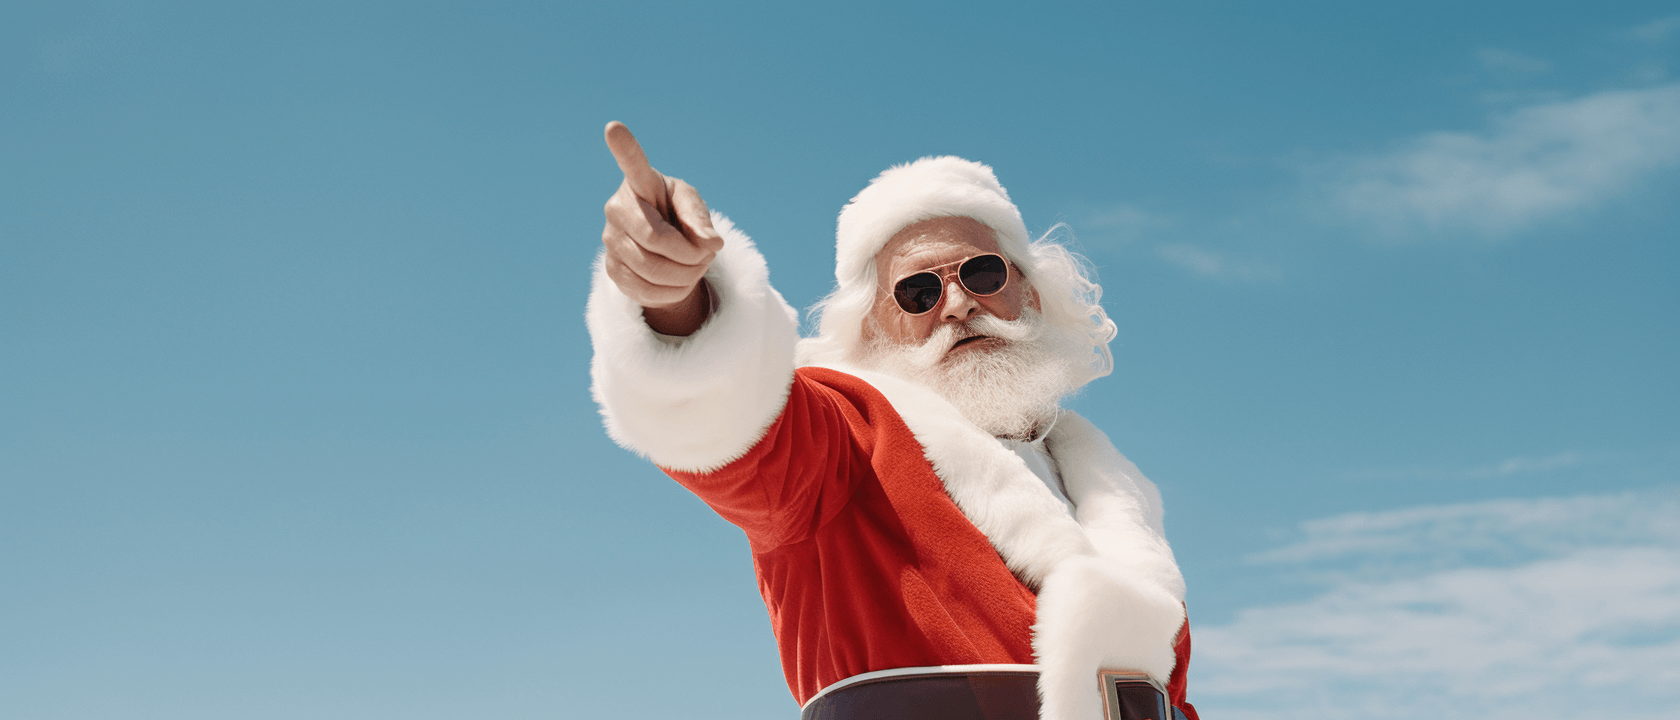 Your Complete Guide to Copyright Free Christmas Music